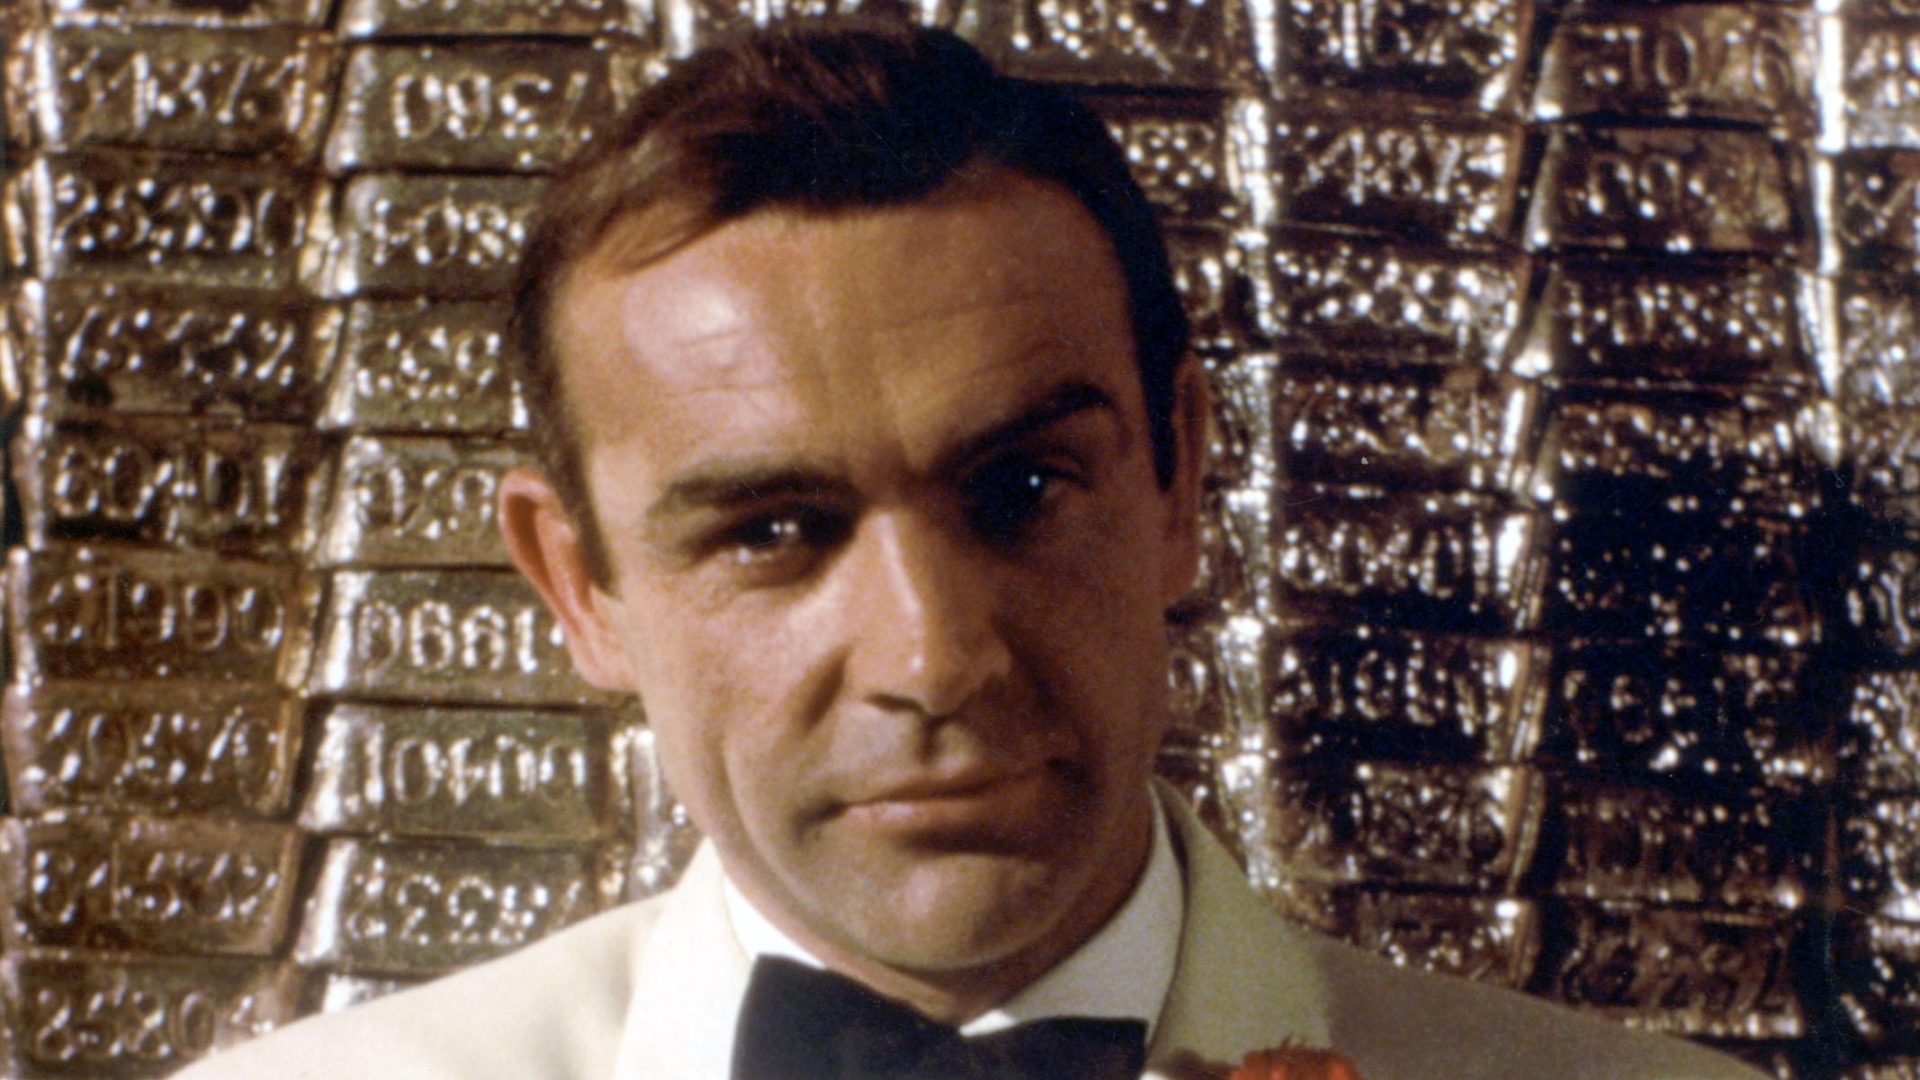 Ian Fleming's Bond novels have been re-worded to remove racist material